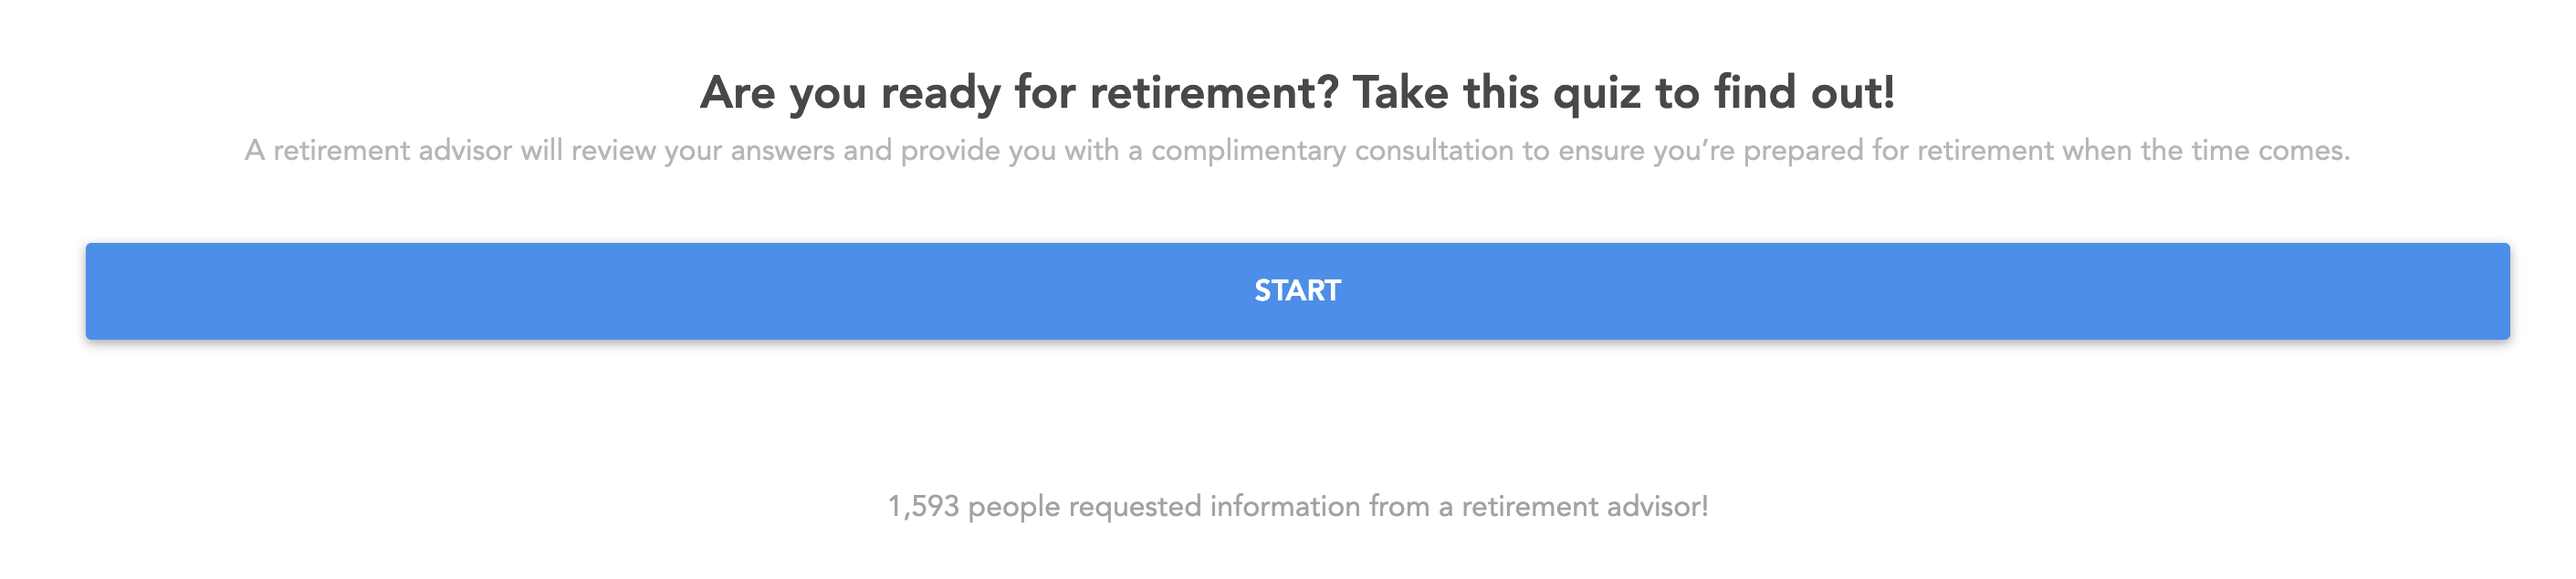 retirement lead quiz first step